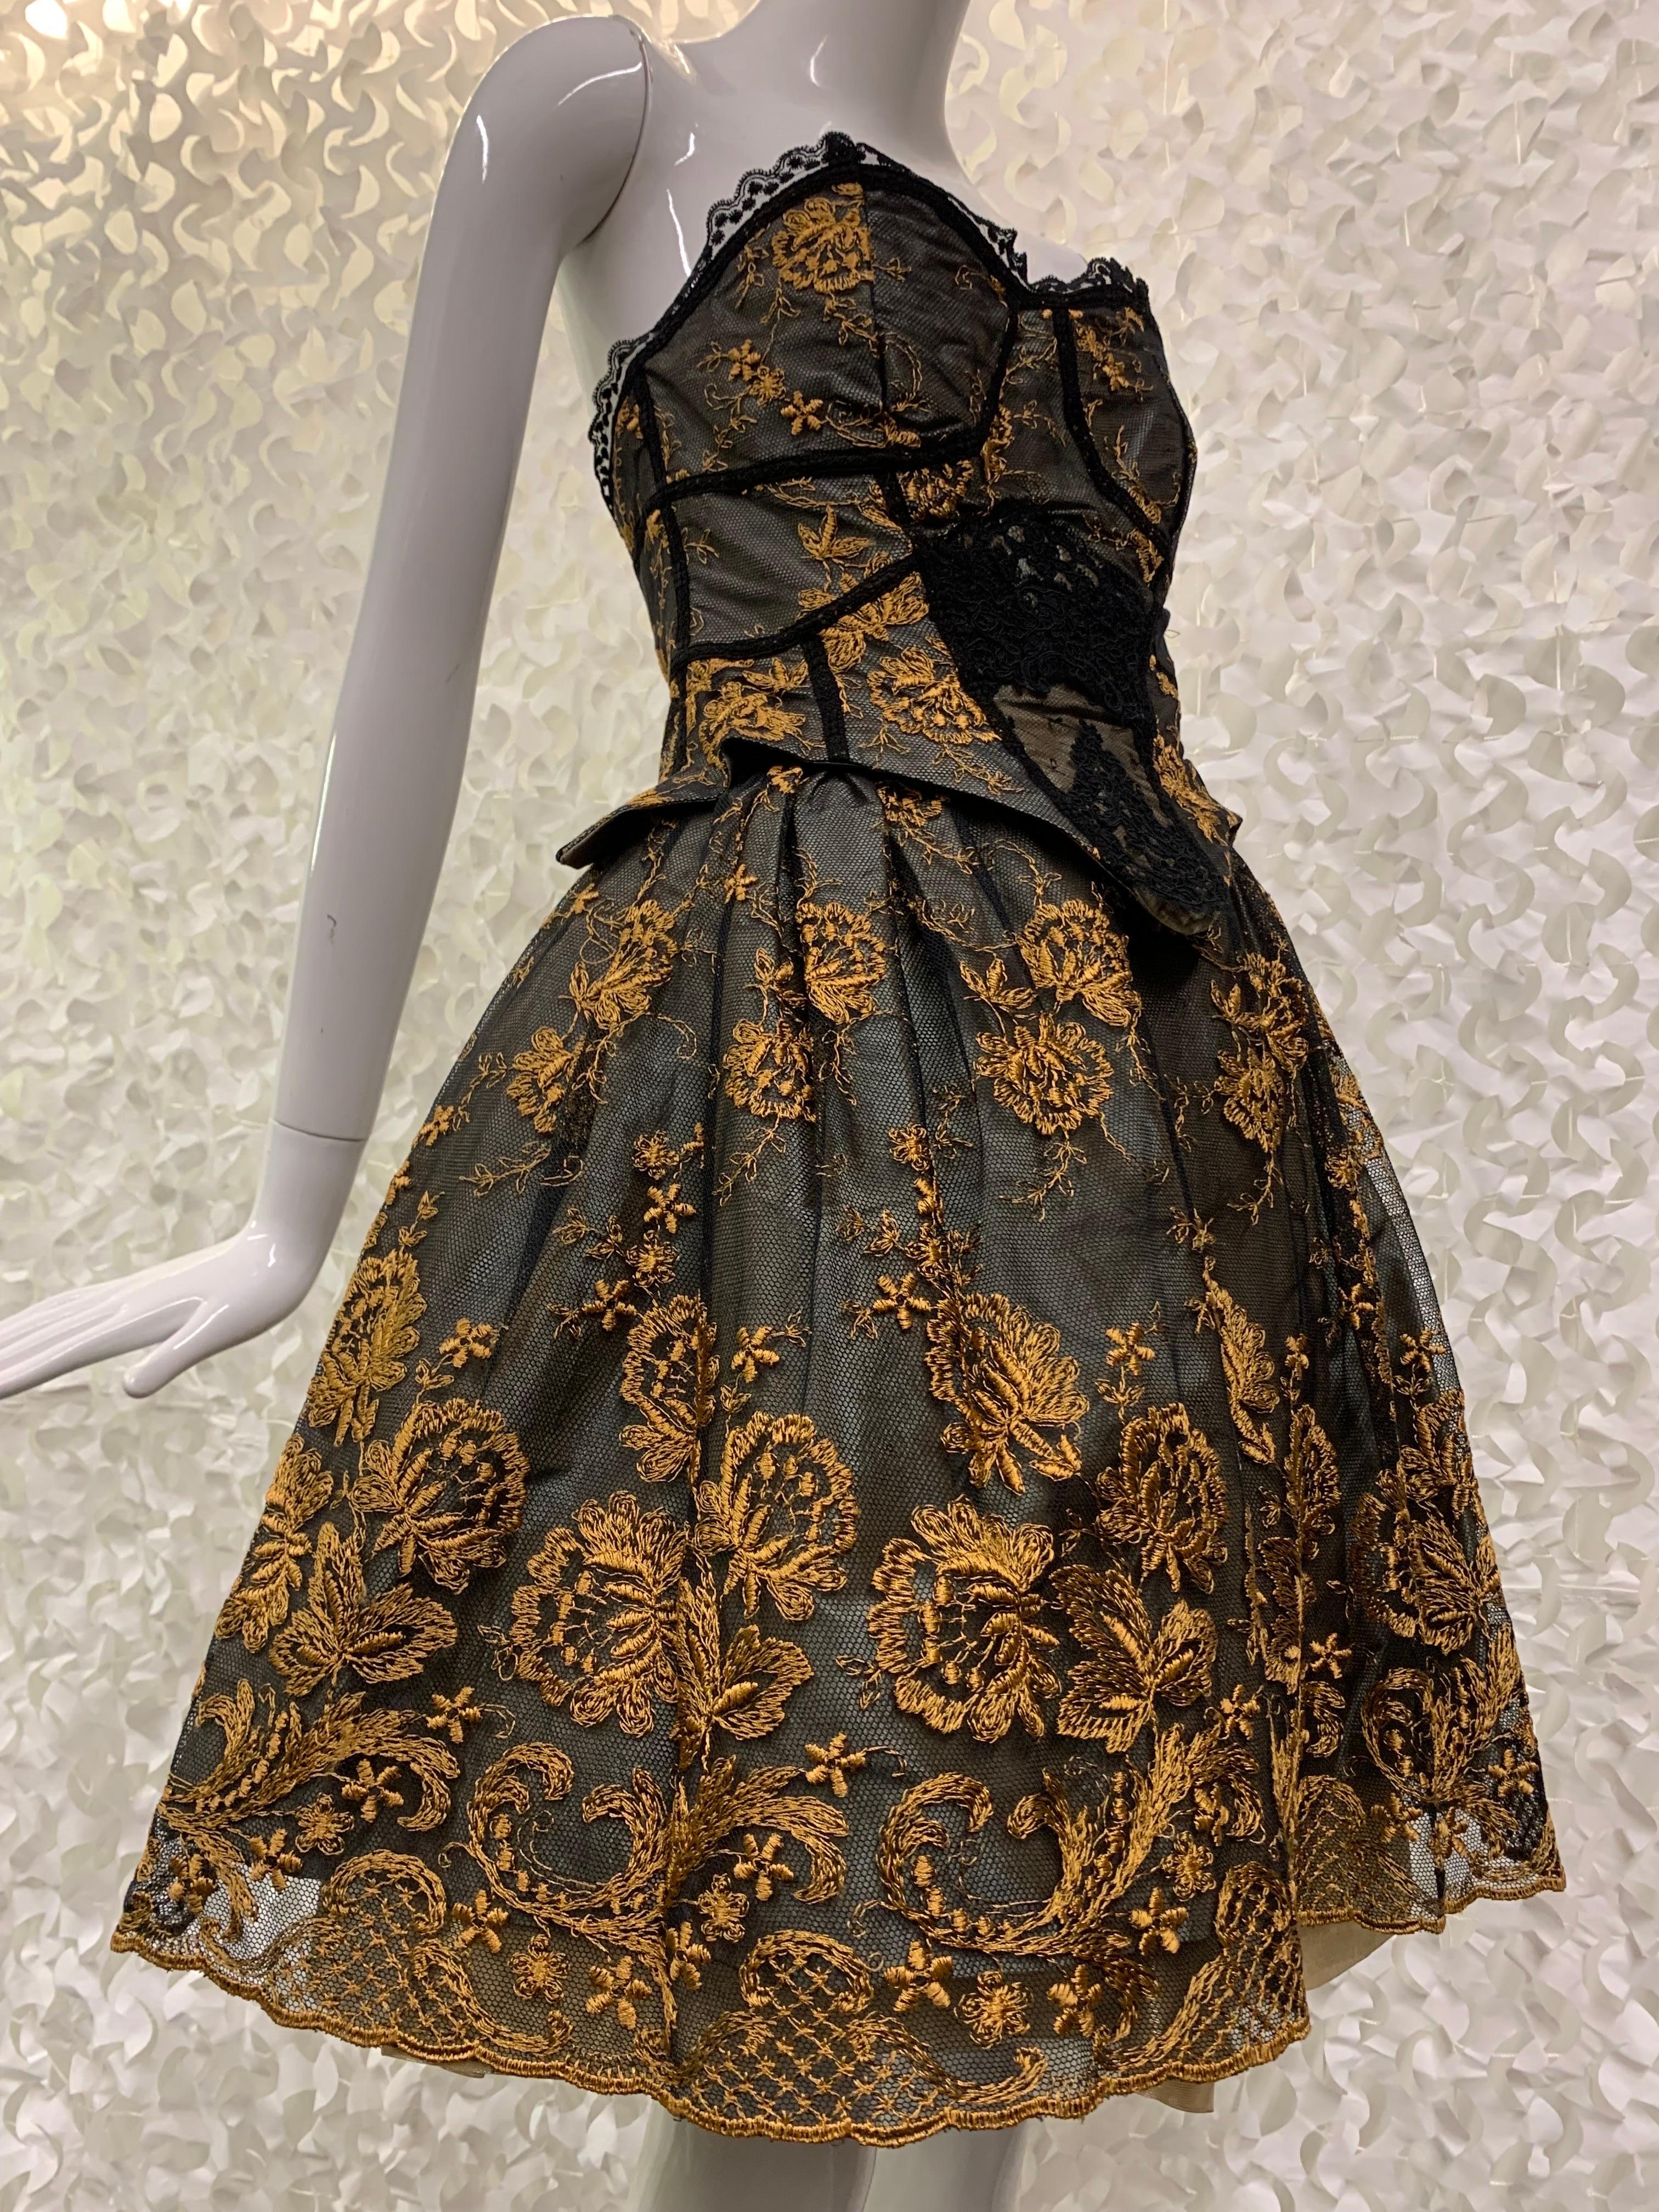 1990s Christian LaCroix Strapless Merry Widow Dress w Pouf Skirt in Black Lace and Gold Embroidery 

A fantastically iconic LaCroix that features a 